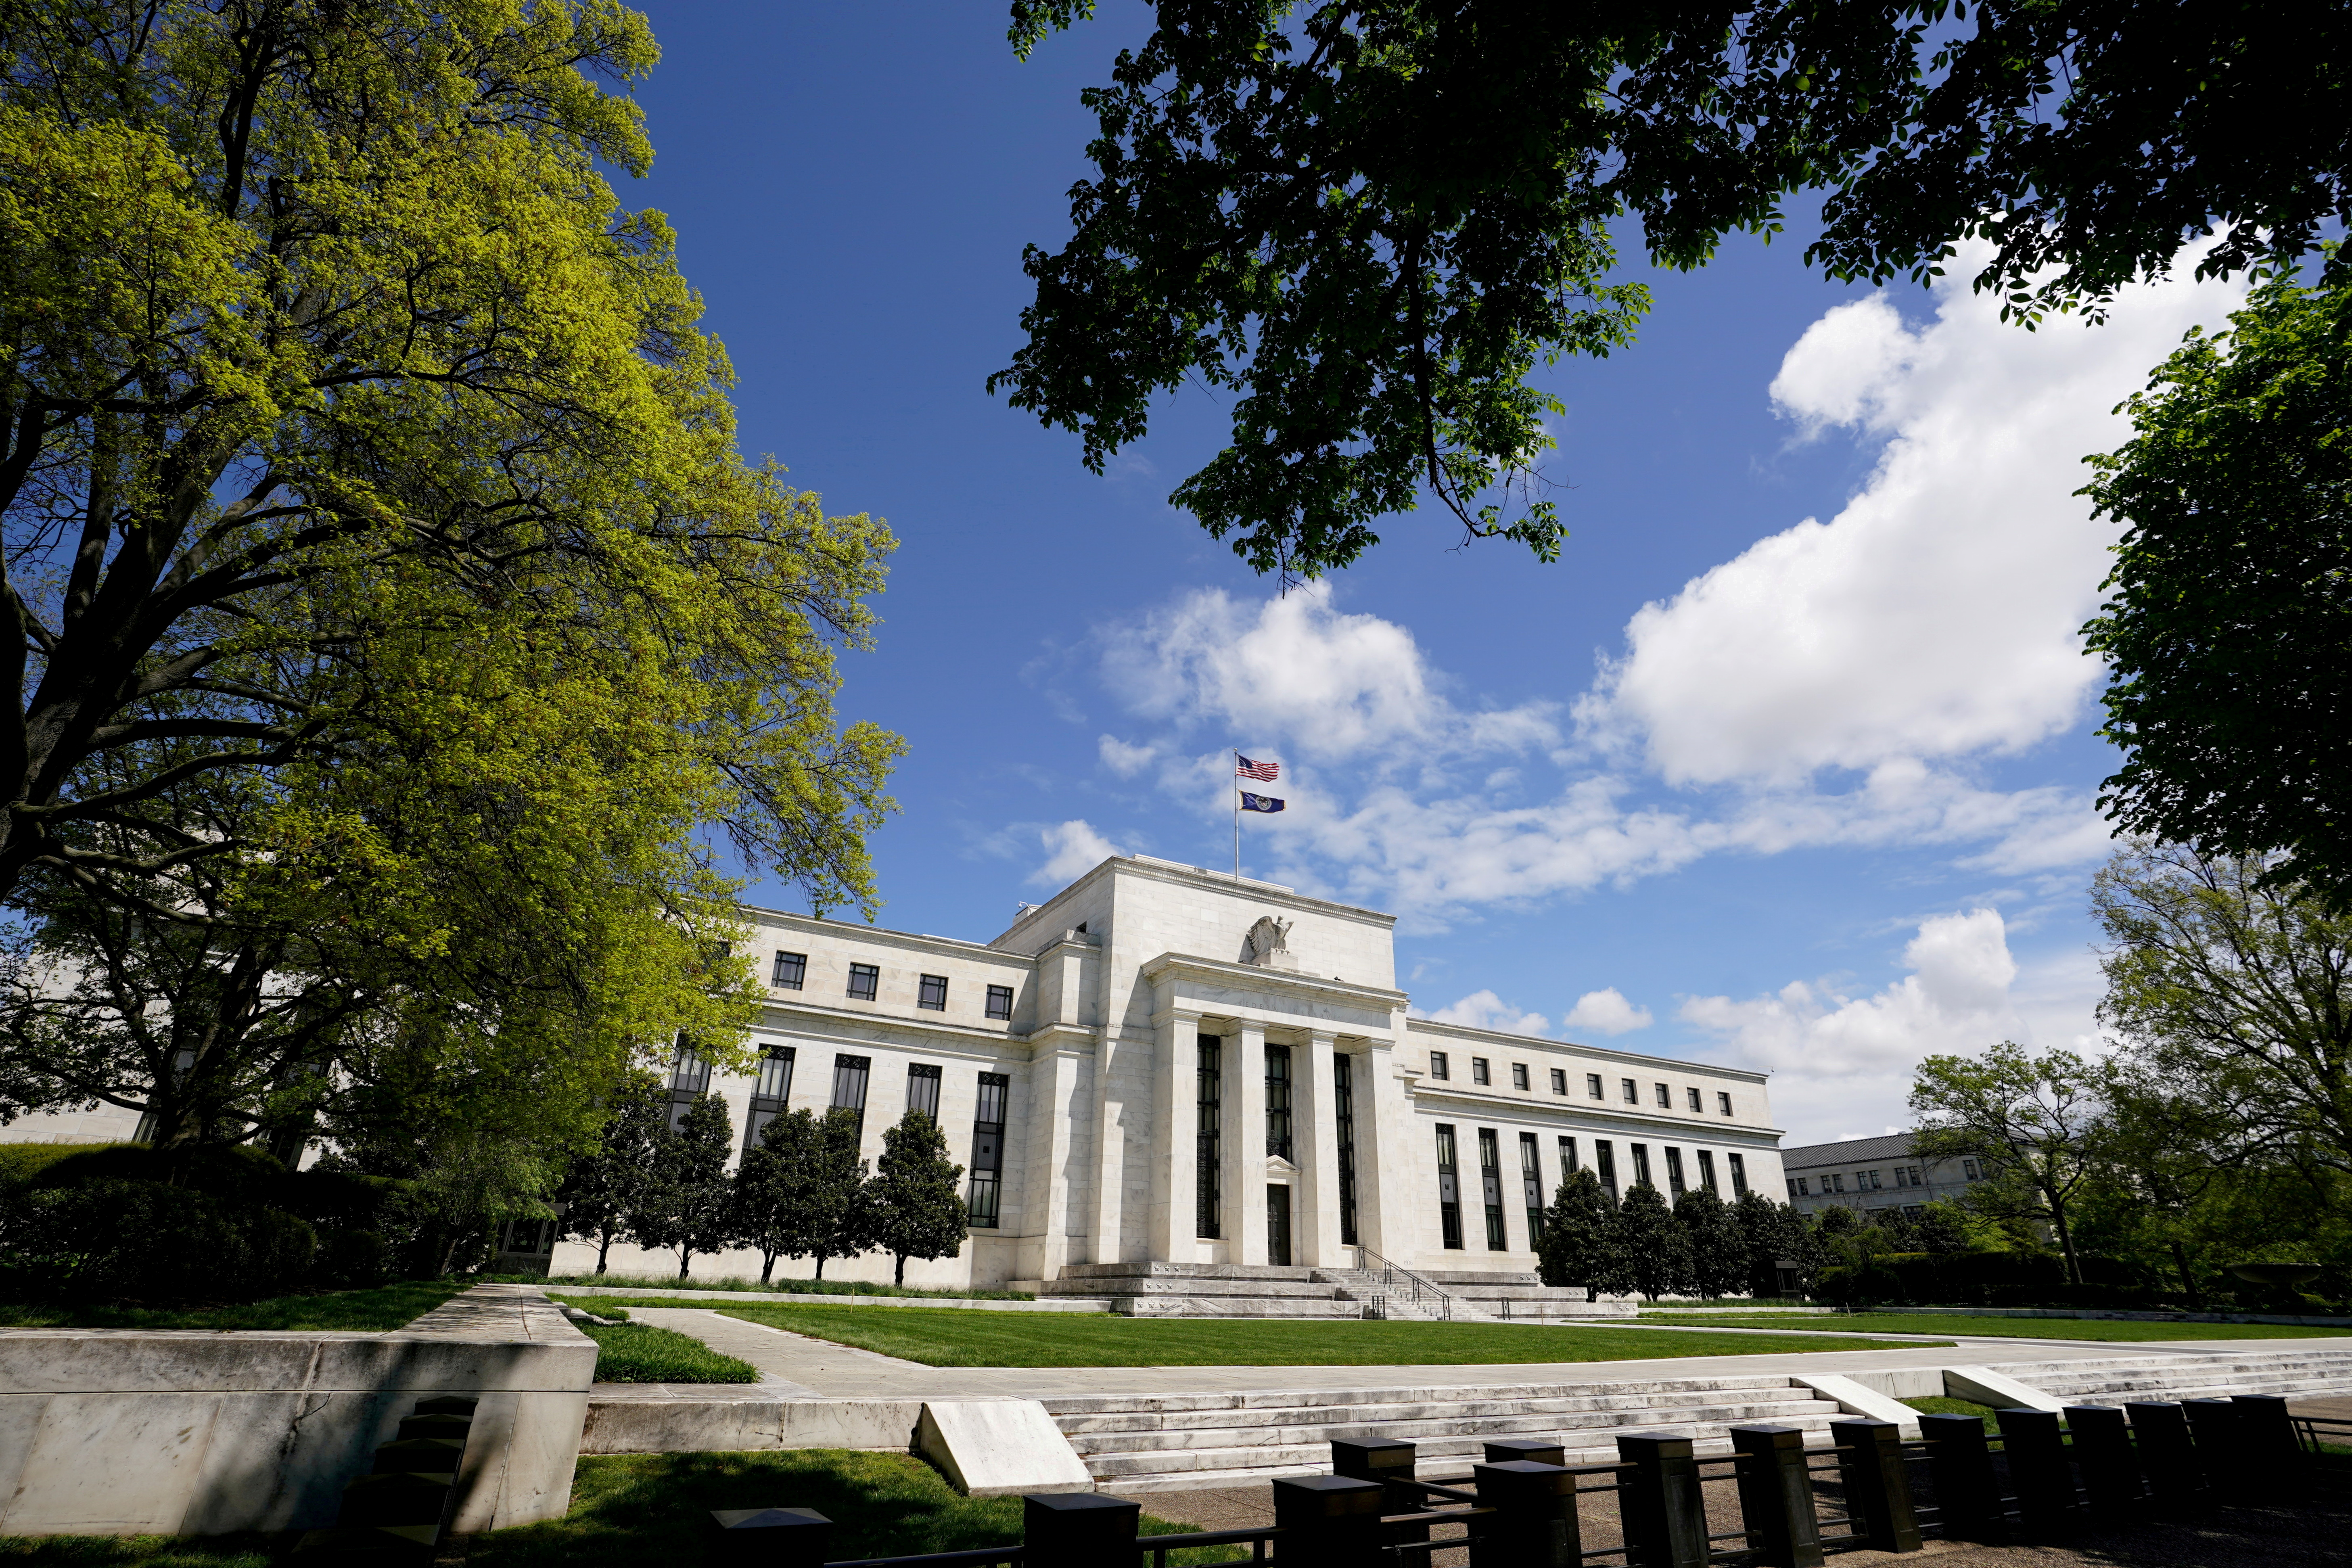 The Federal Reserve building is set against a blue sky in Washington, U.S., May 1, 2020. REUTERS/Kevin Lamarque